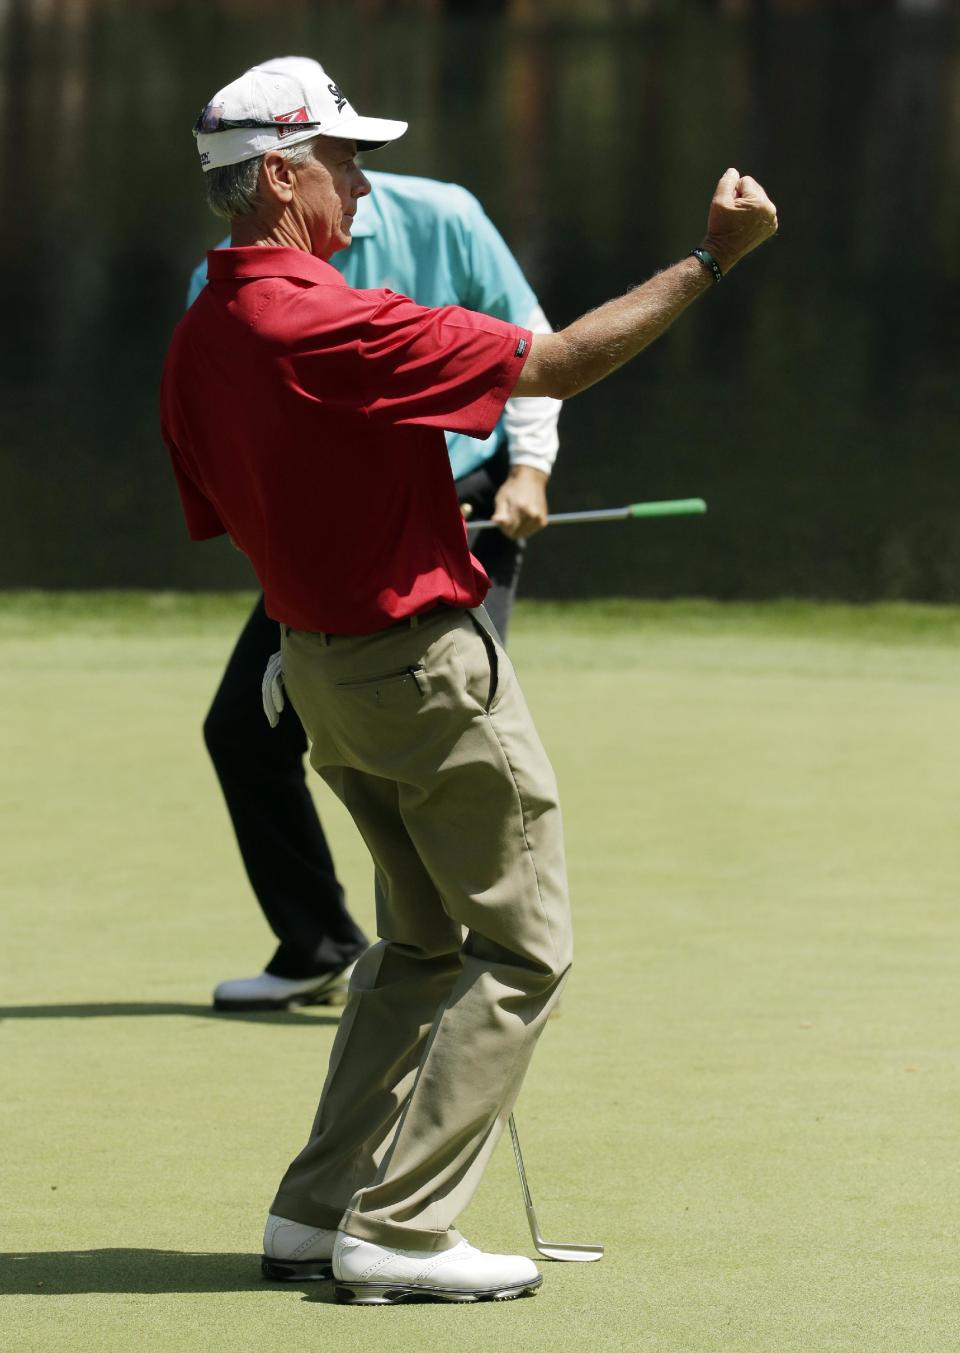 Larry Mize pumps his fist after a birdie on the ninth hole during the par three competition at the Masters golf tournament Wednesday, April 9, 2014, in Augusta, Ga. (AP Photo/Chris Carlson)